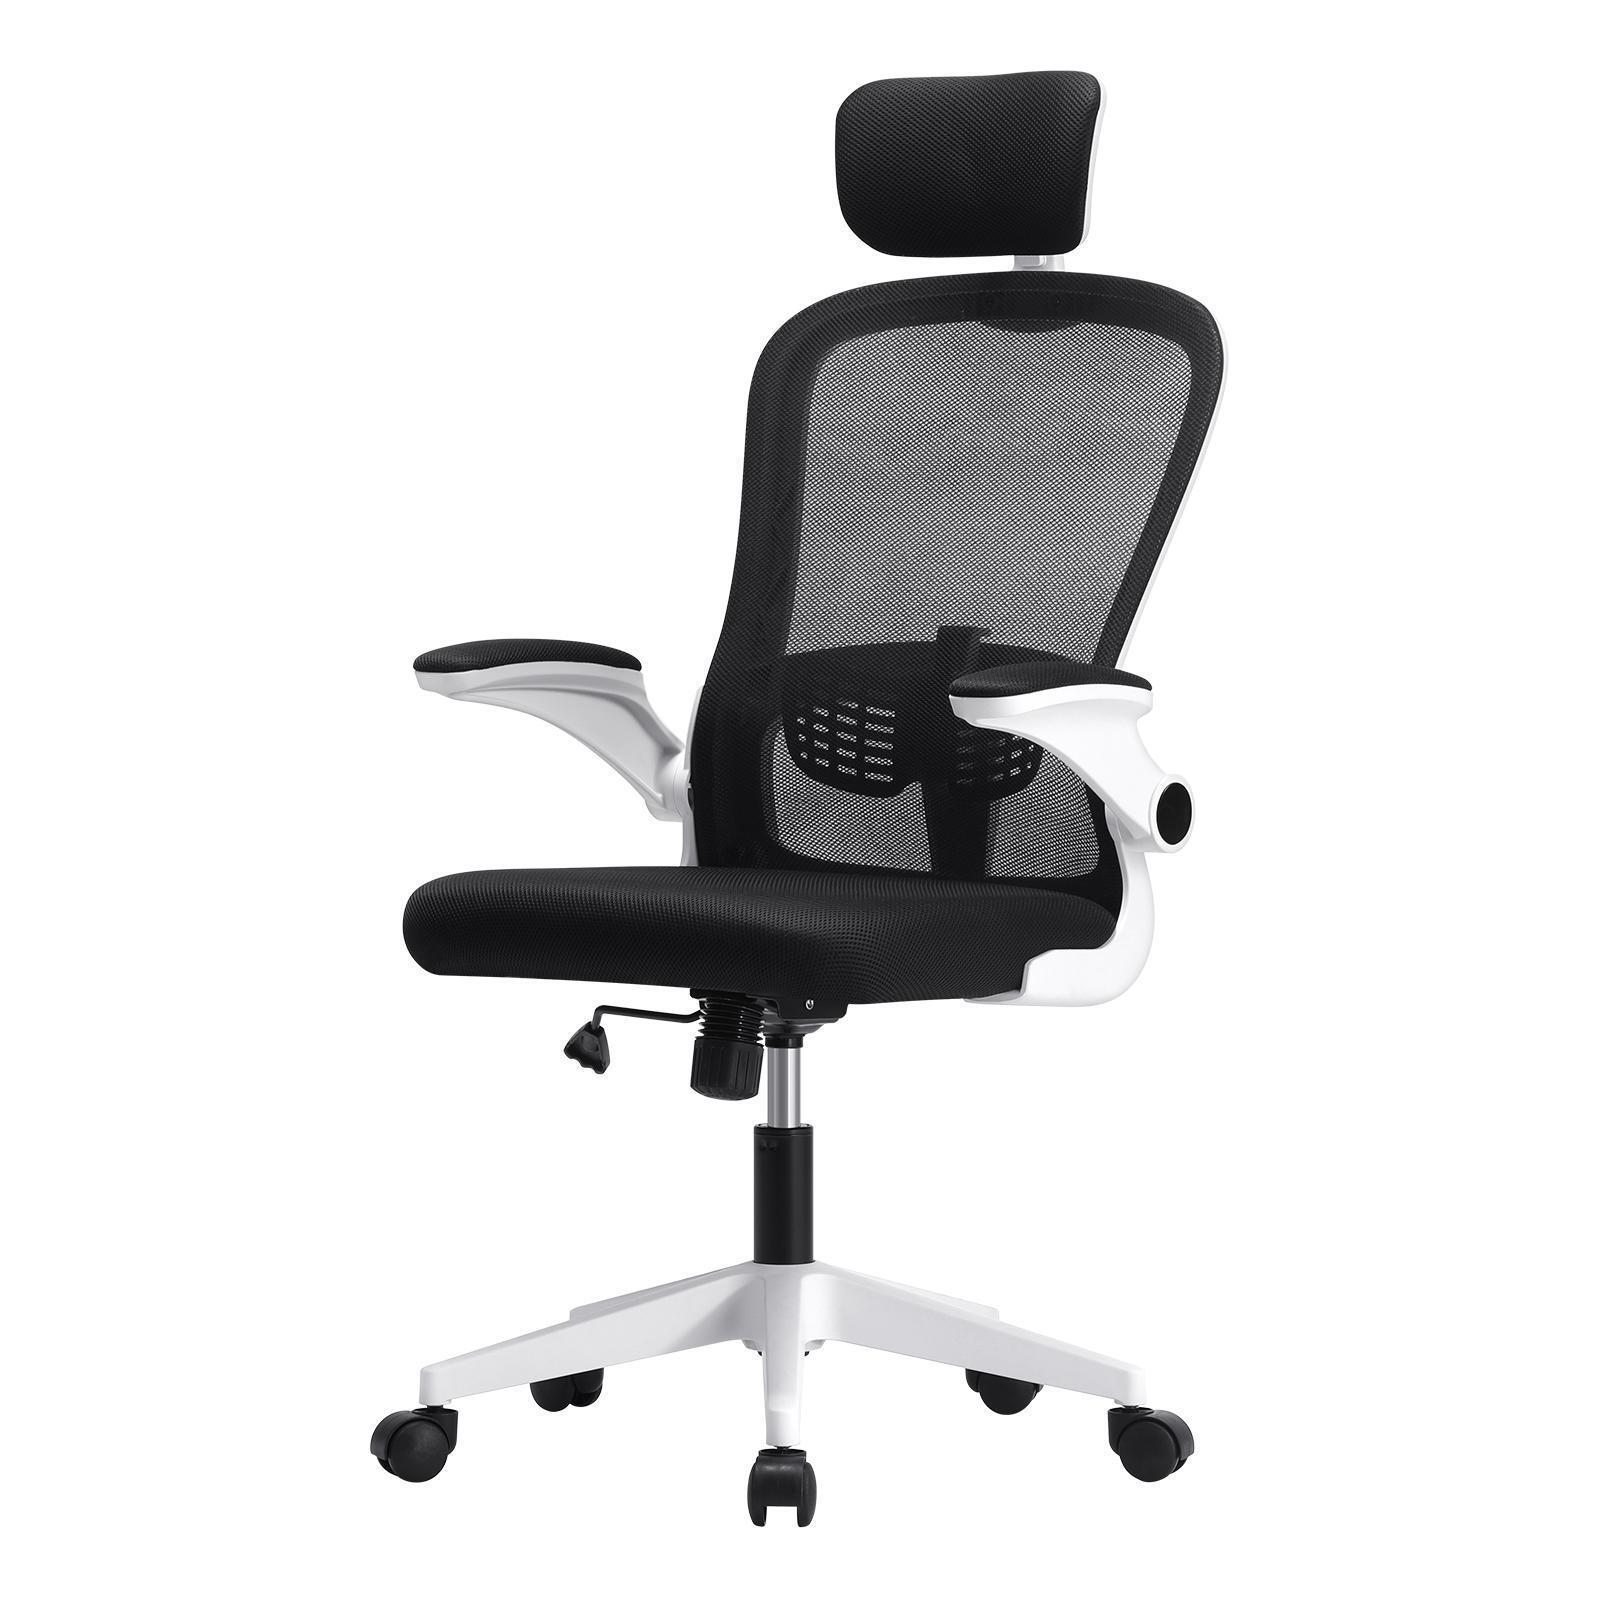 Oikiture Mesh Office Chair Executive Fabric Gaming Seat Racing Tilt Computer White&Black